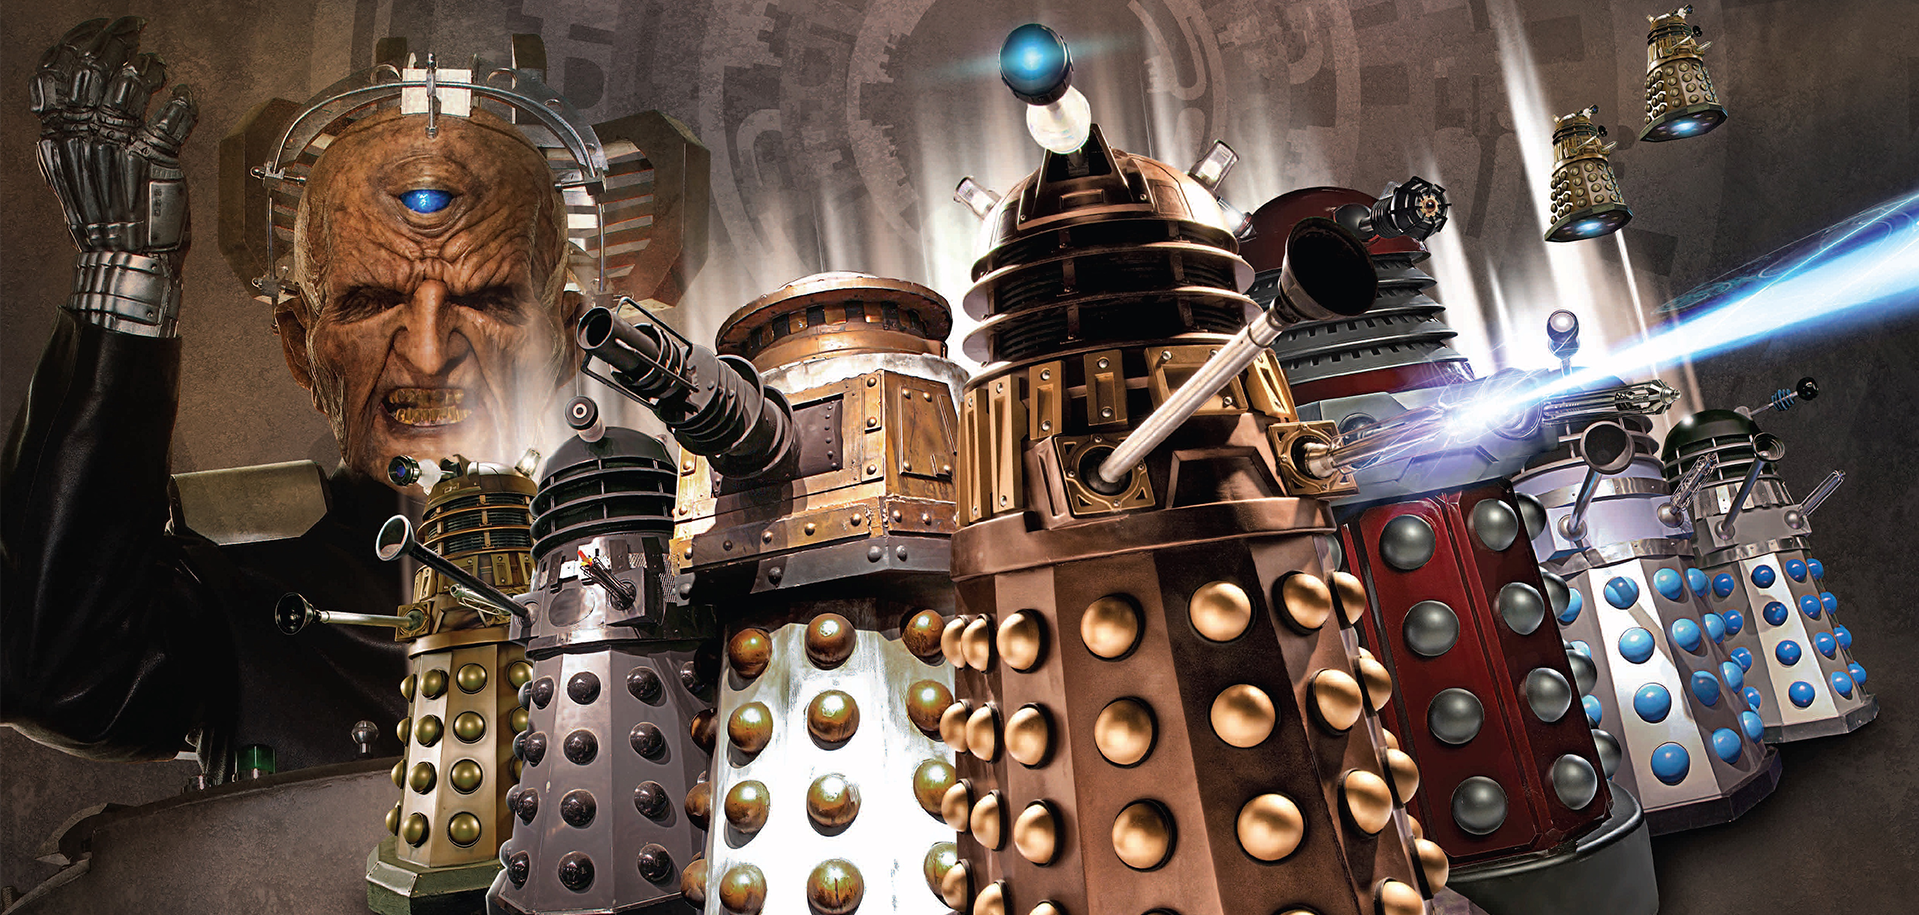 Image featuring differnt Daleks